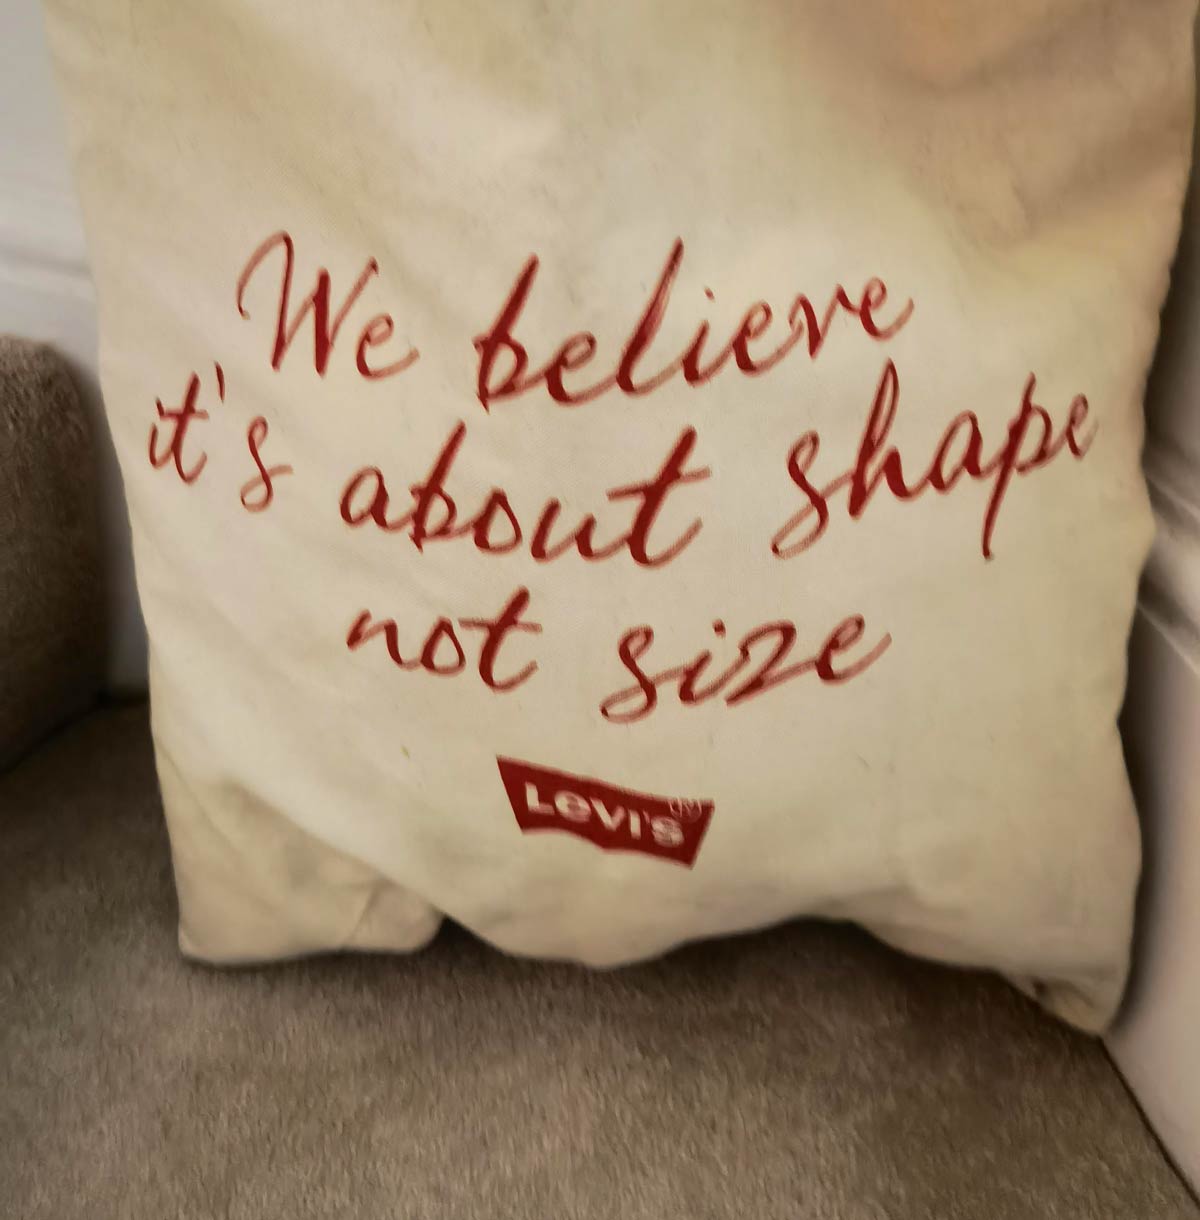 This bag my girlfriend gave to me